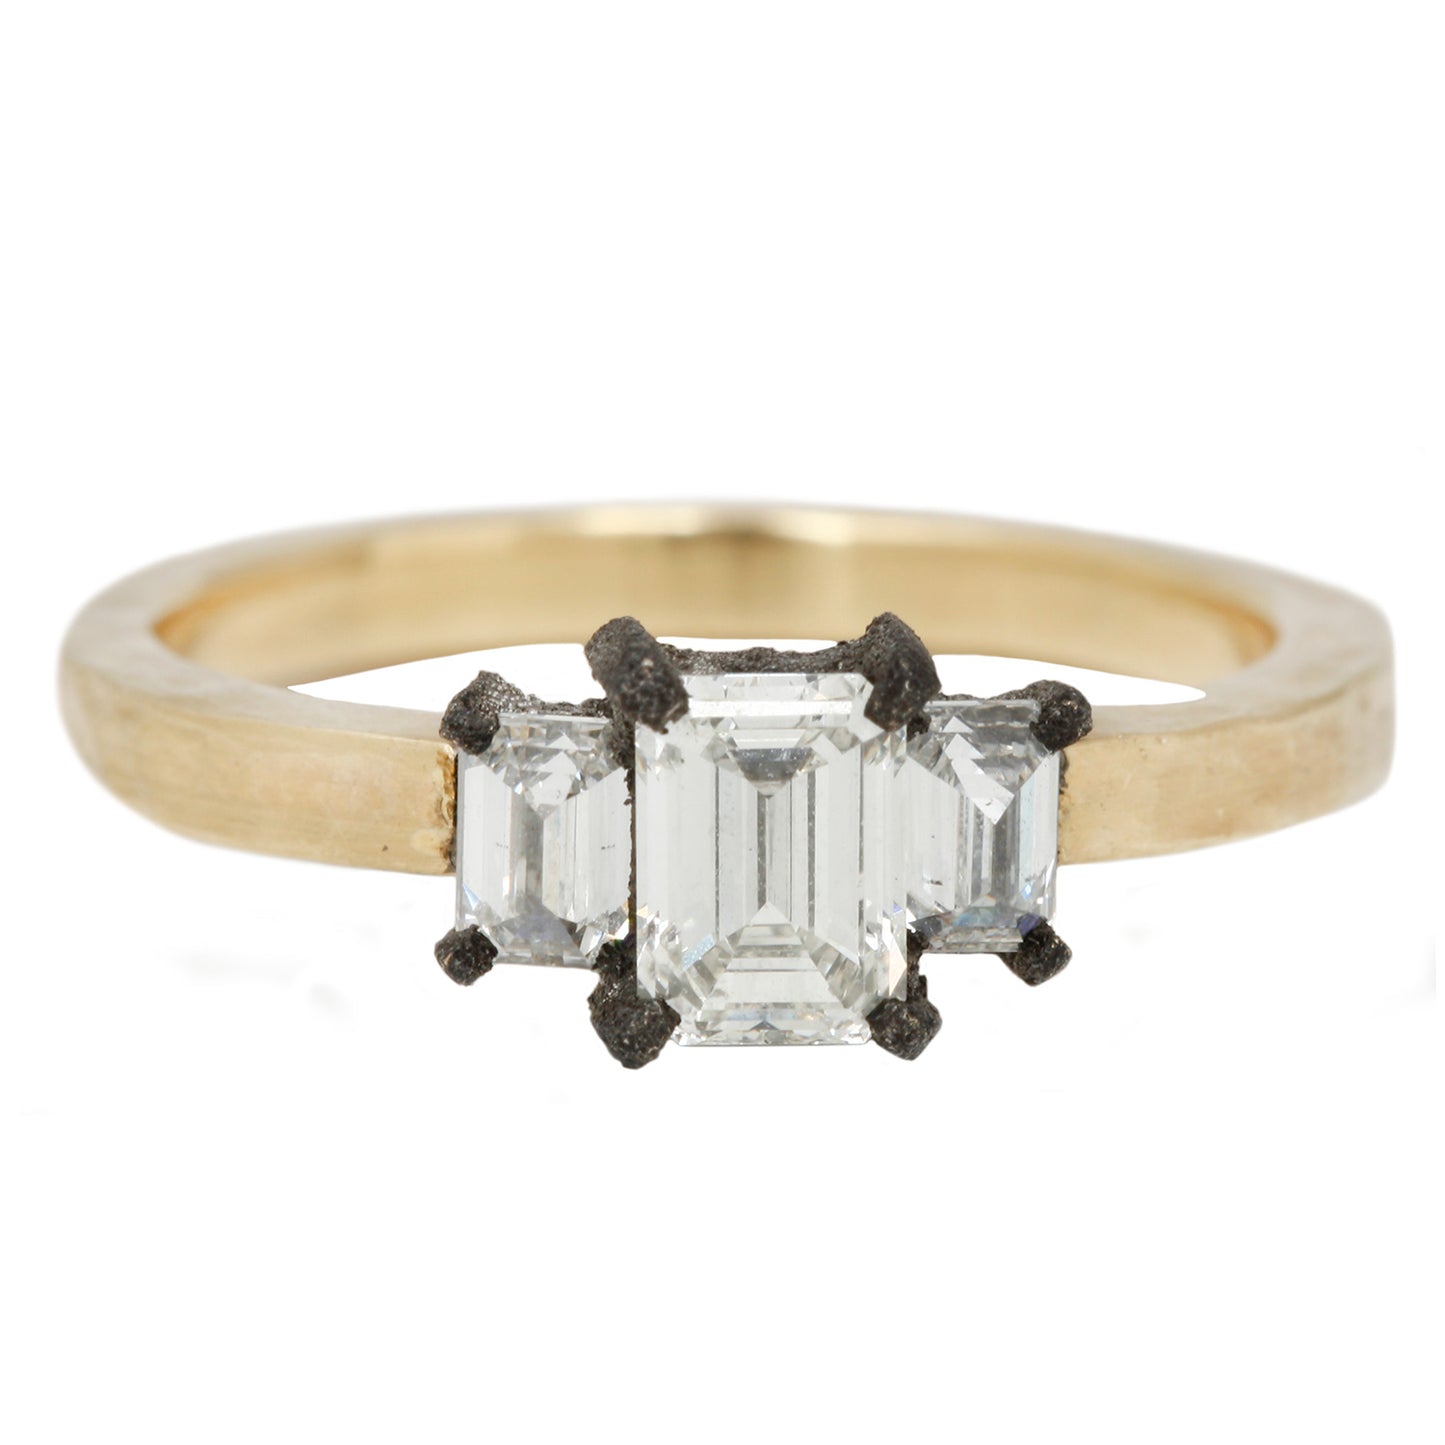 TAP by Todd Pownell Rise To The Occasion Ring with White Emerald cut diamonds